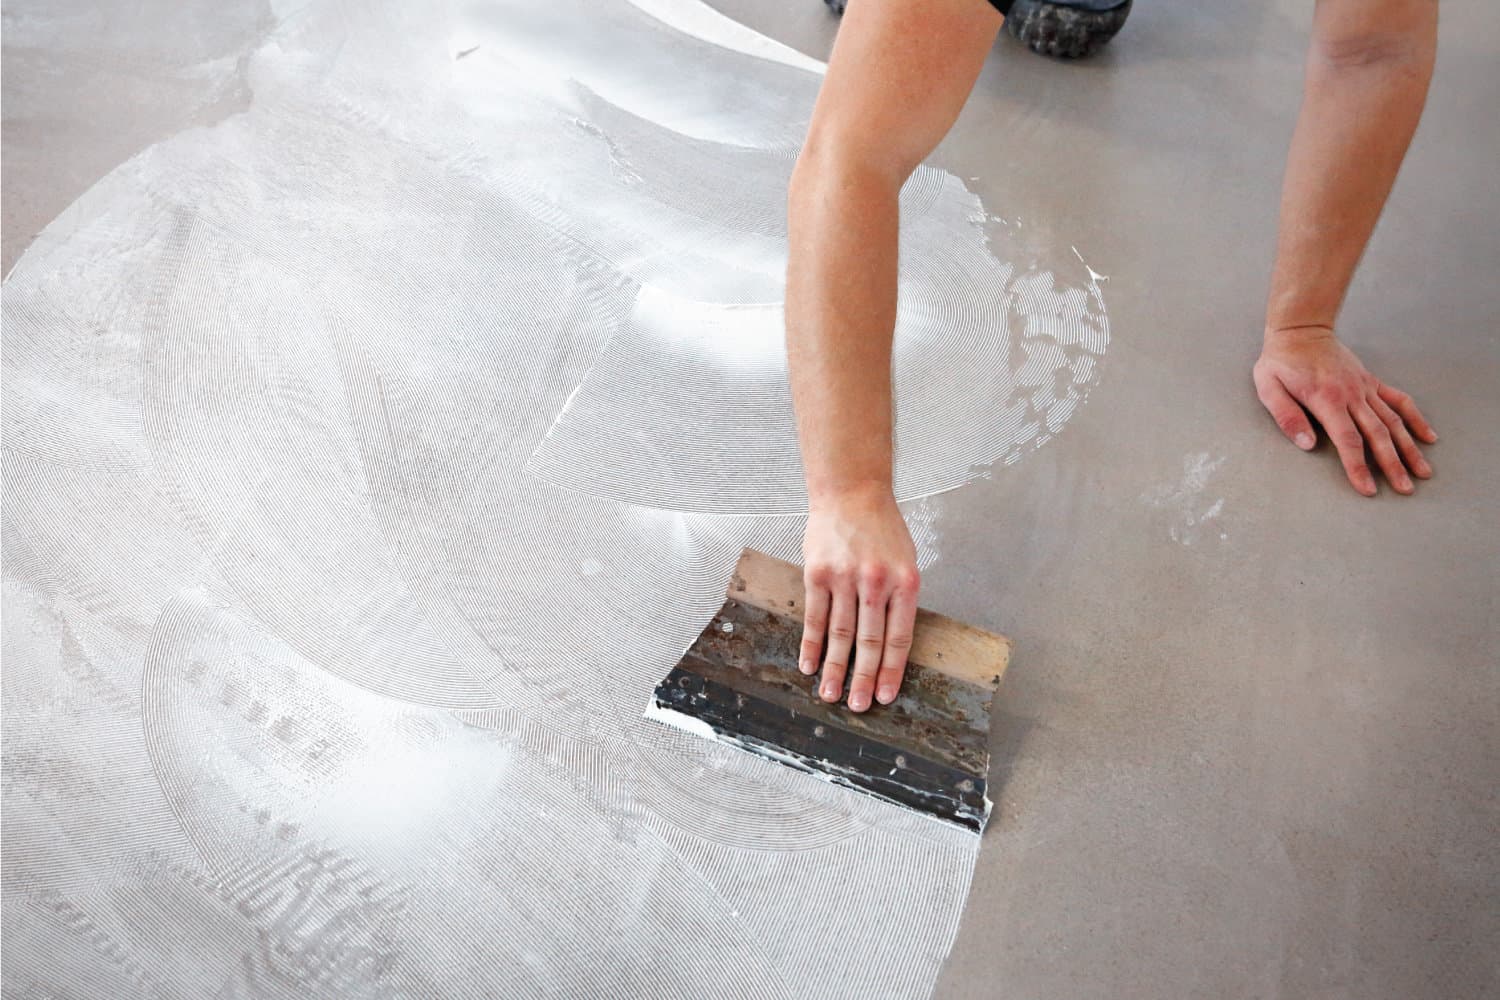 Worker spreading adhesive substance